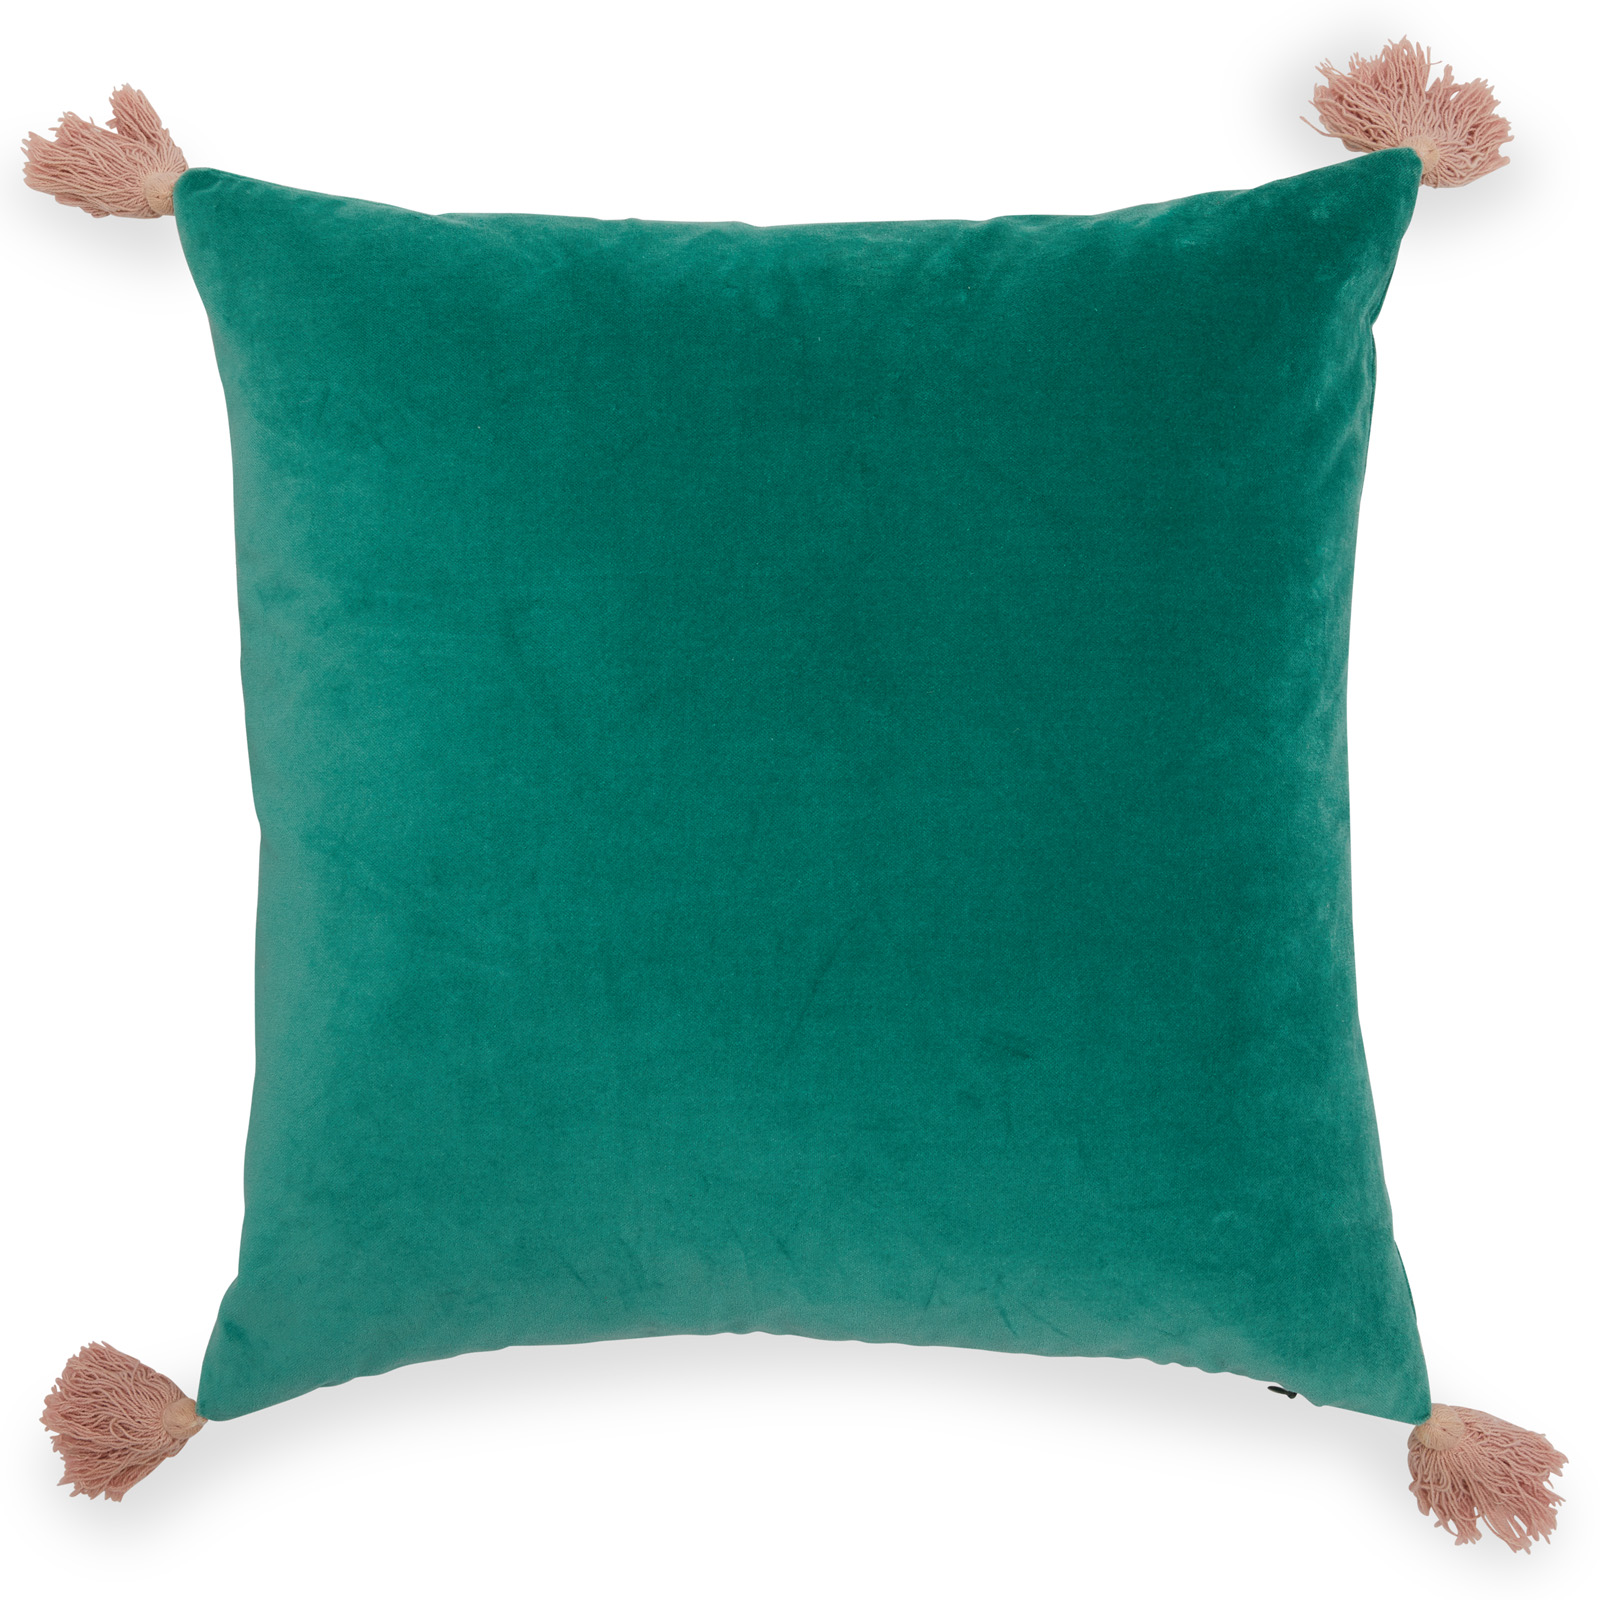 Drew Barrymore Flower Home Velvet Decorative Throw Pillow with Tassels, 20" x 20", Green - image 1 of 5